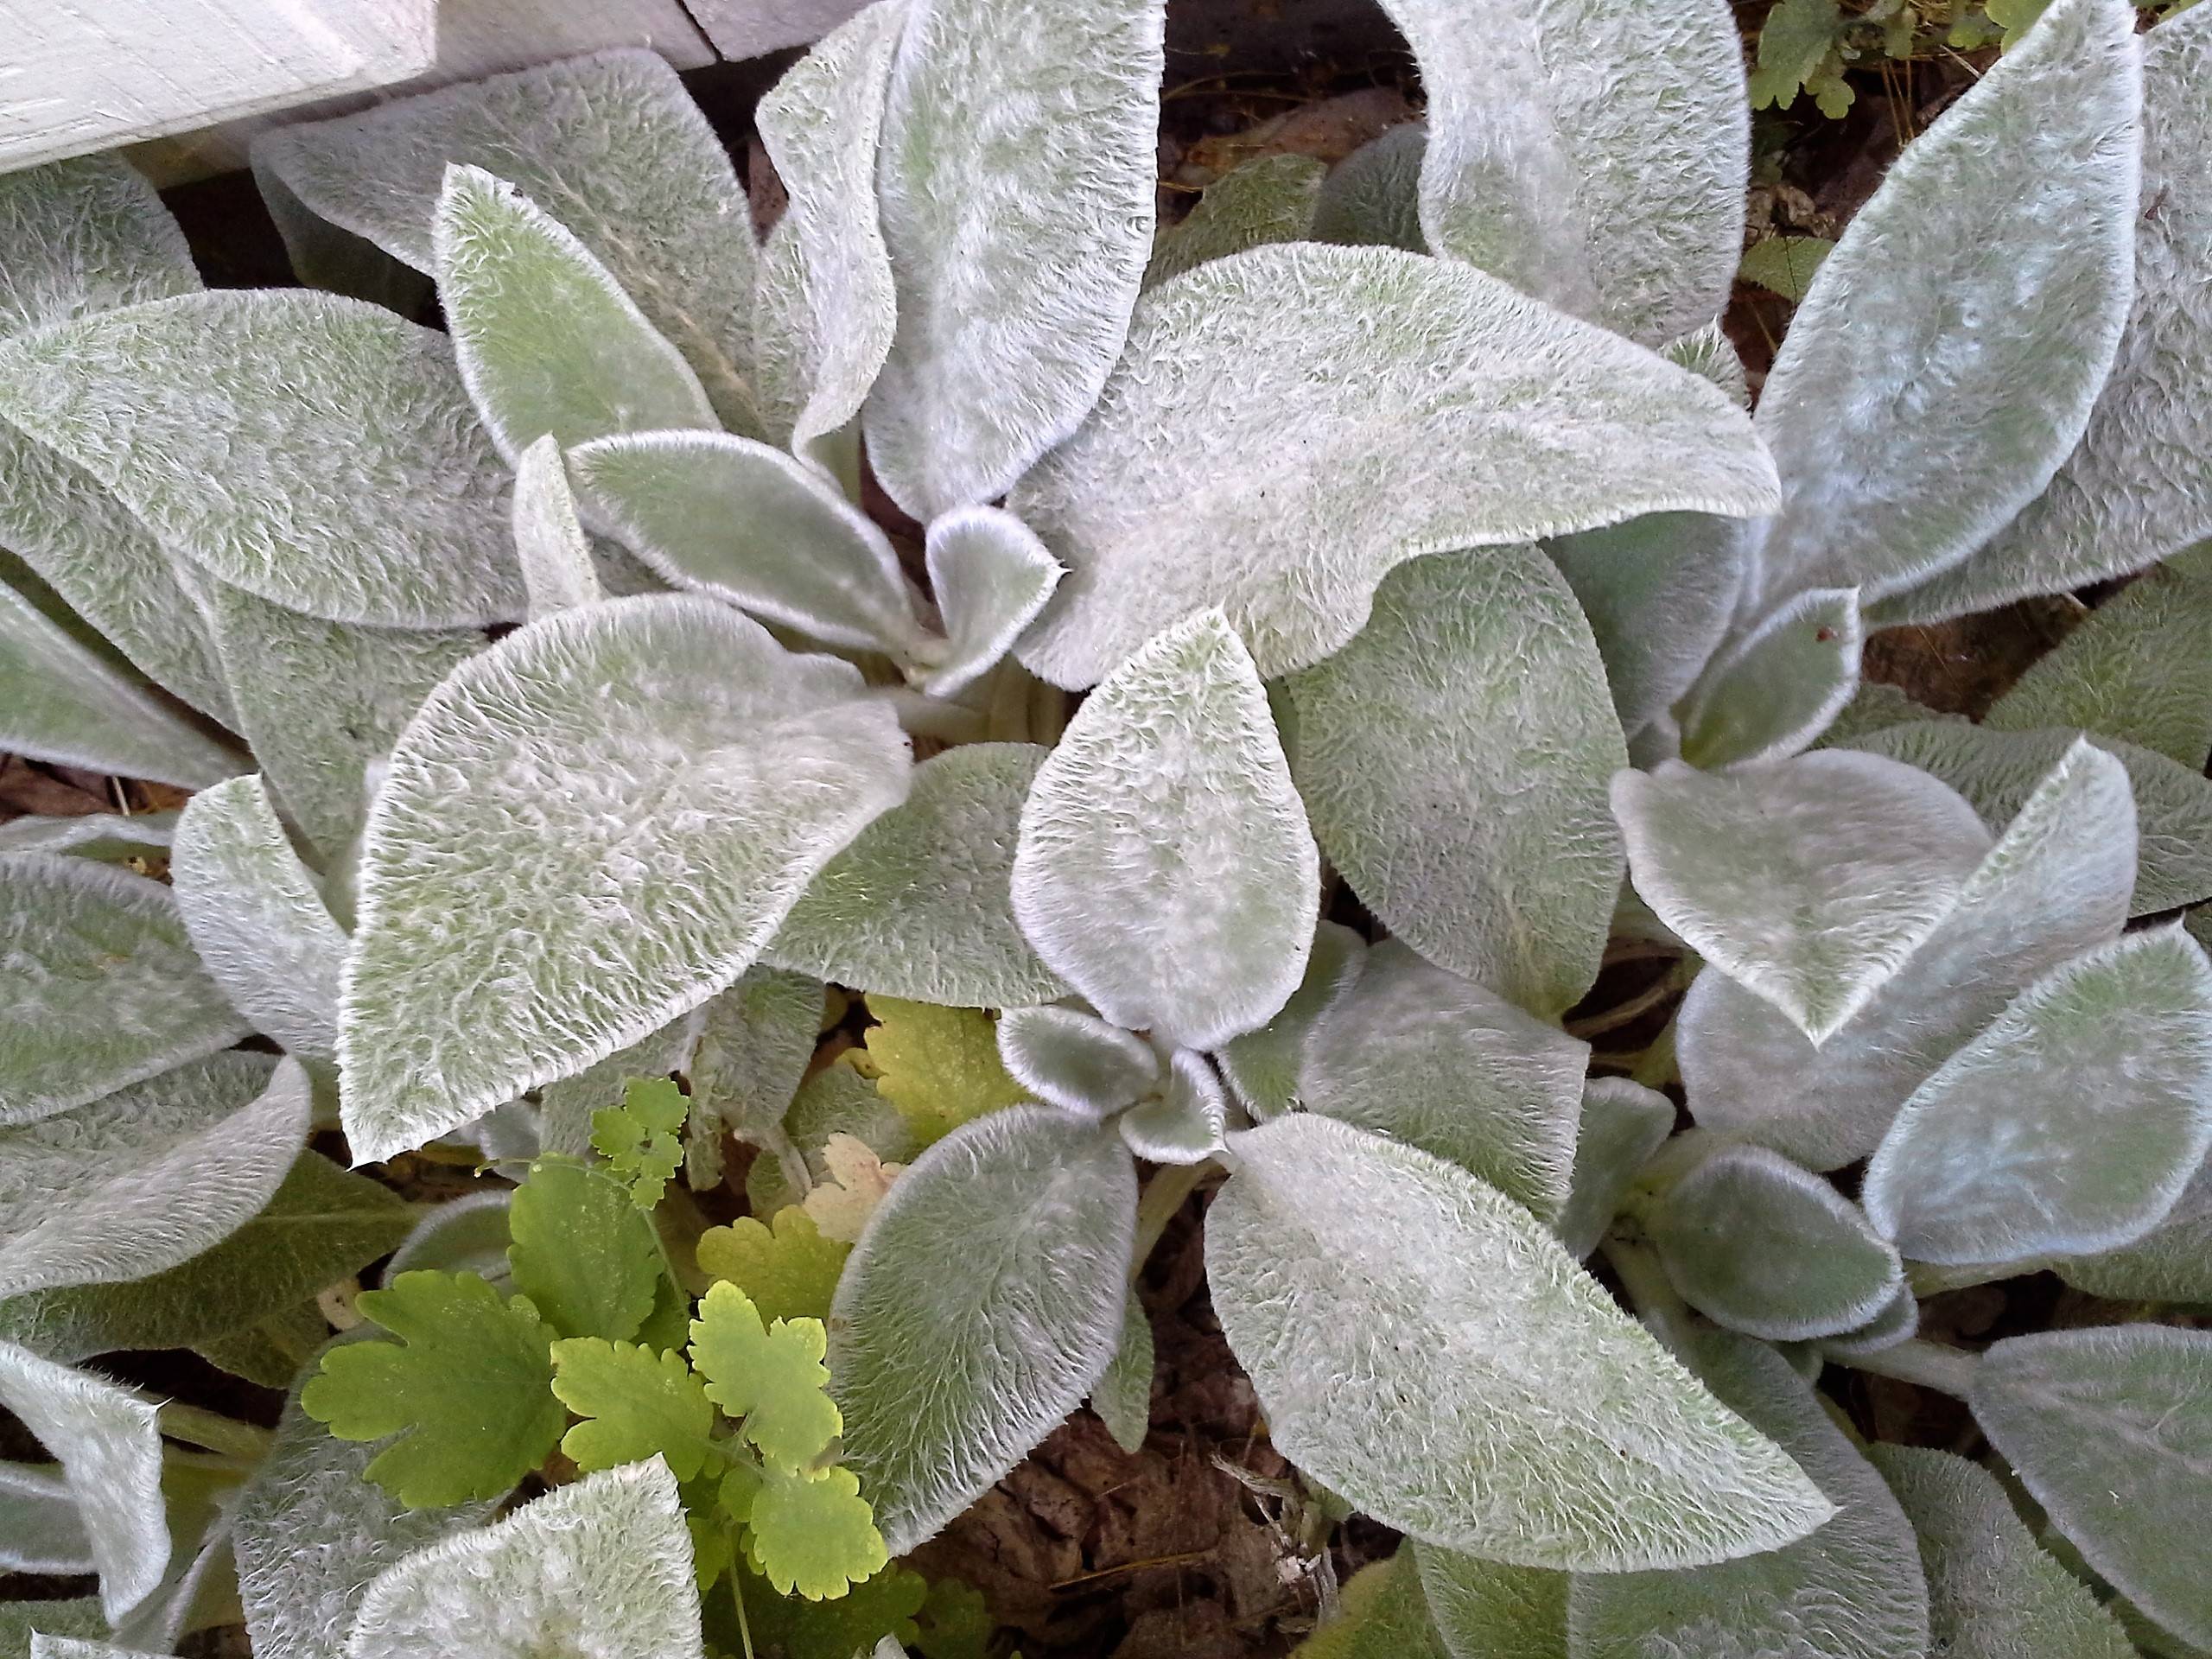 identification - What is this low-growing plant with fuzzy green and ...